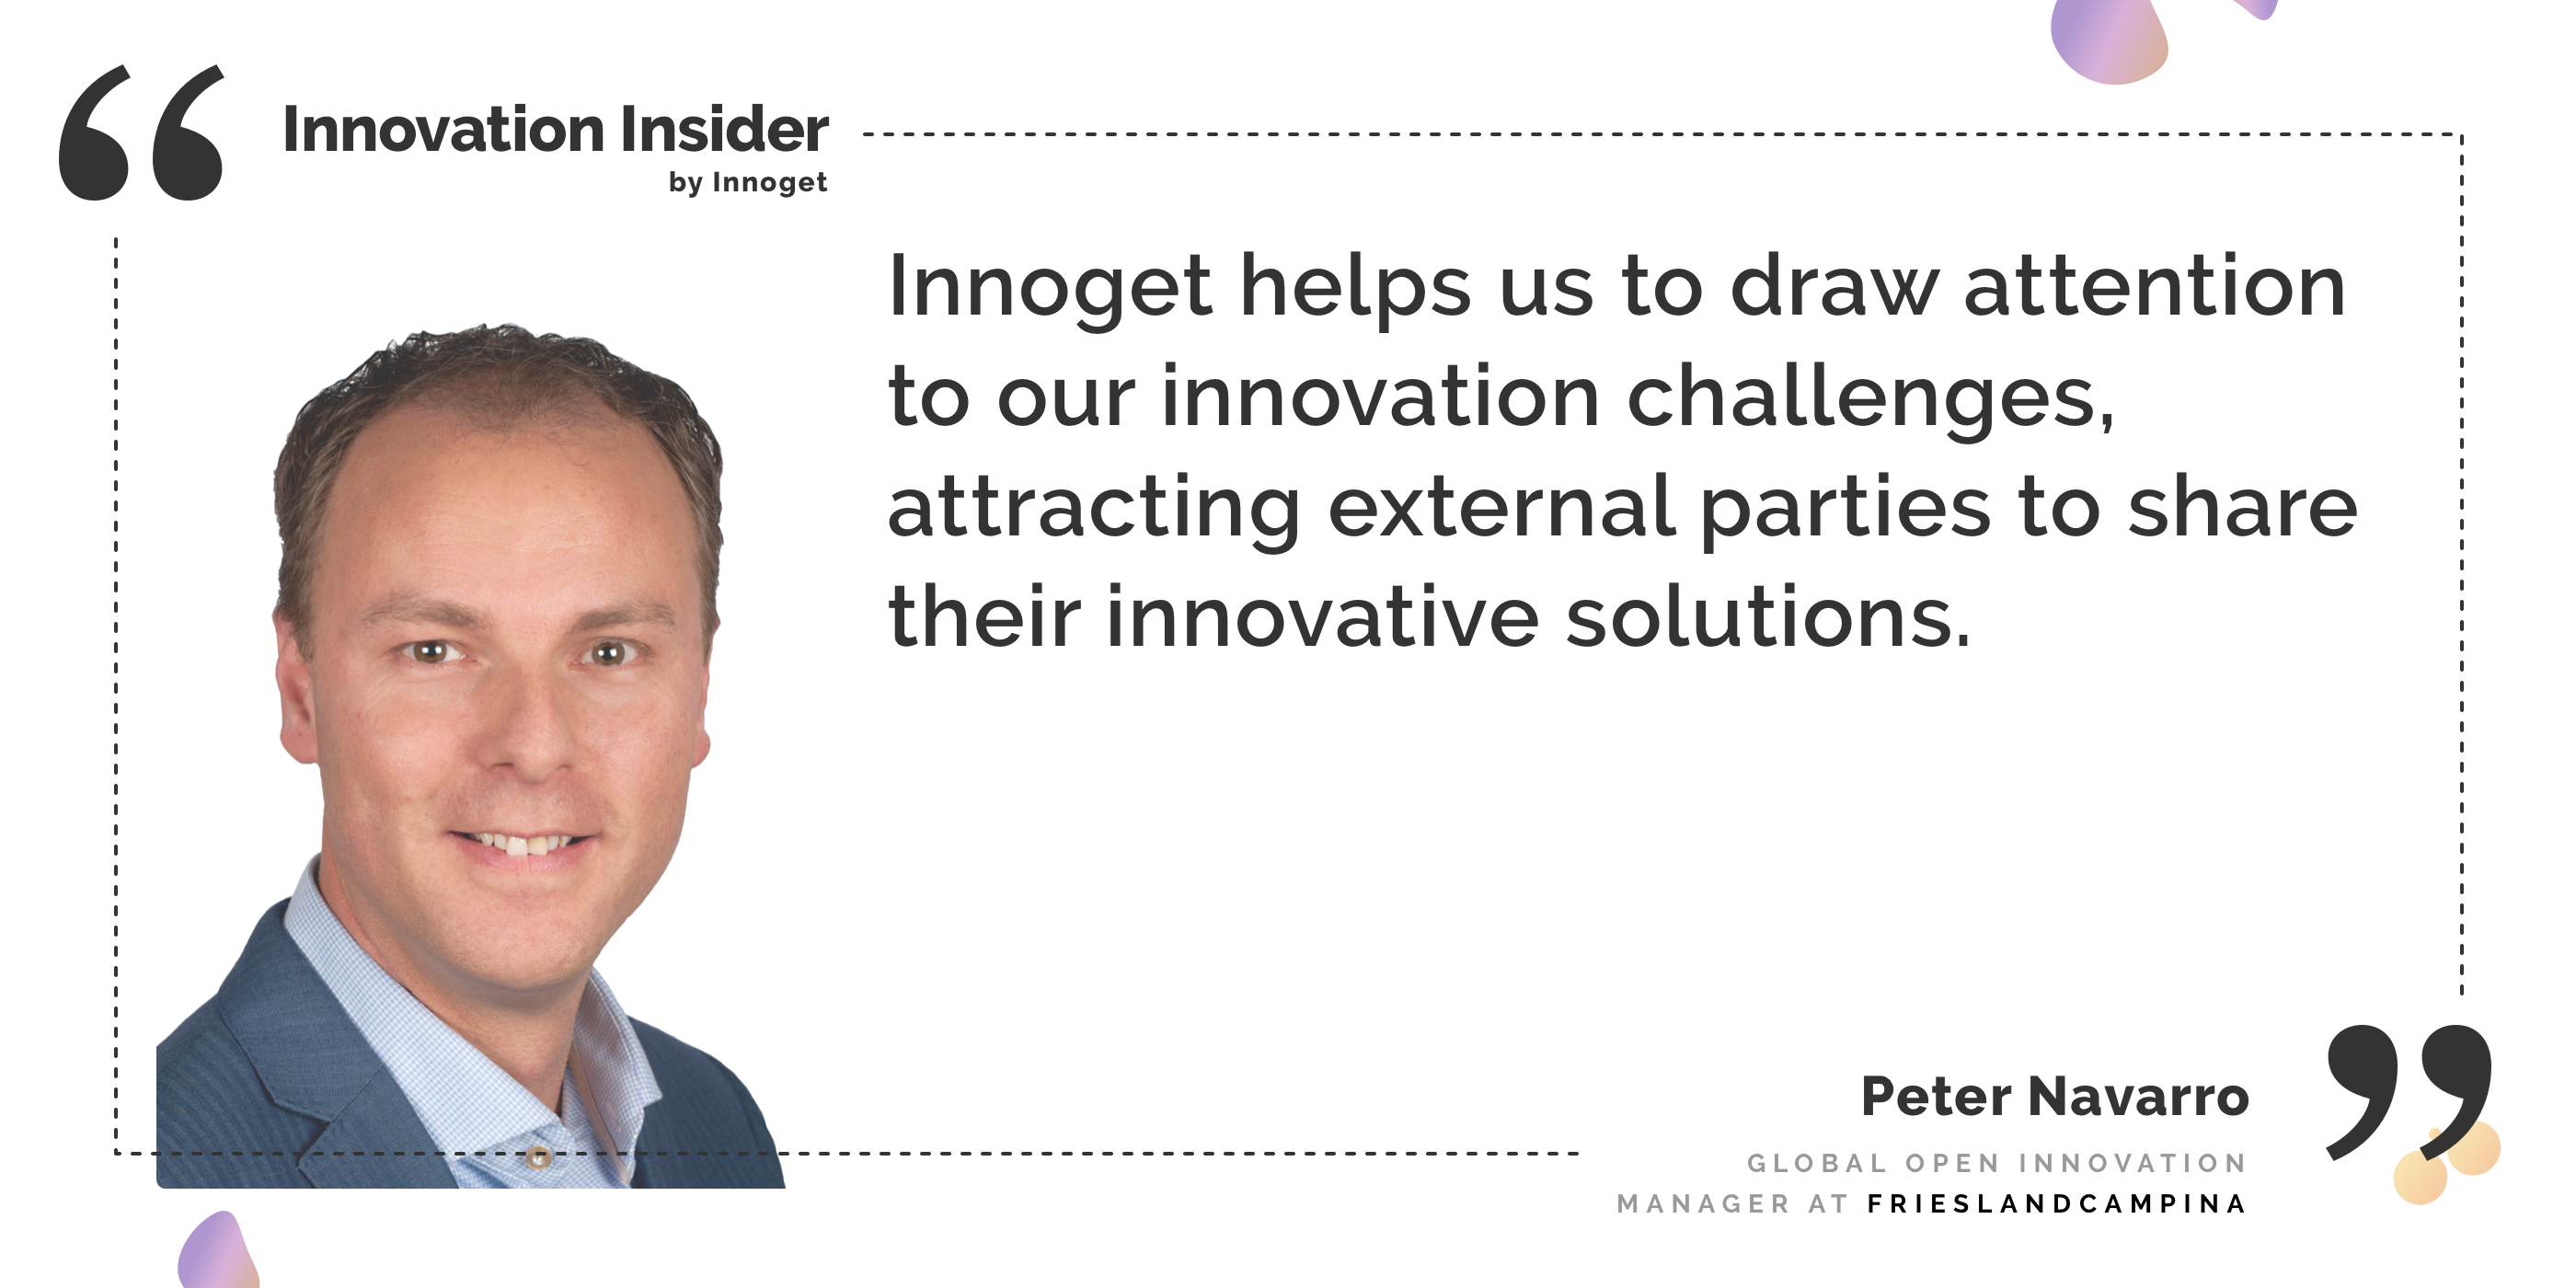 Innovation Insider: An interview with Mr. Peter Navarro, Global Open Innovation Manager at FrieslandCampina